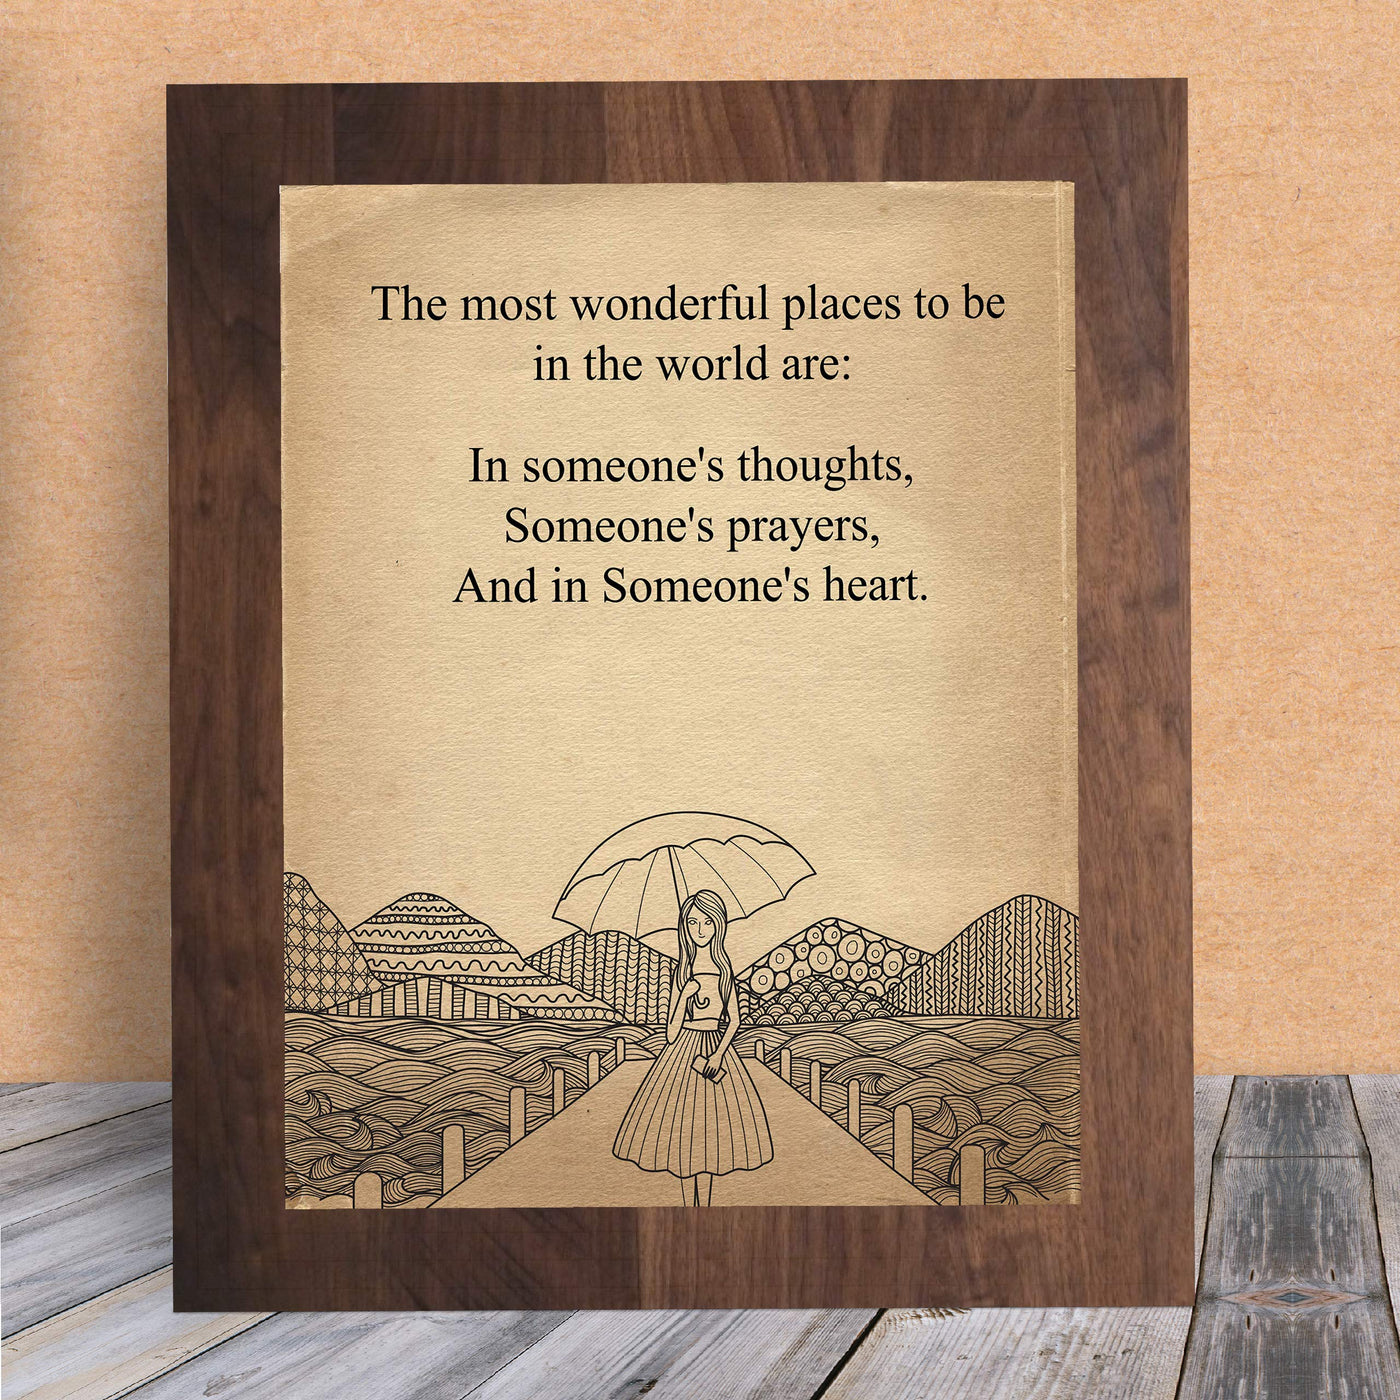 Most Wonderful Places In World-Someone's Thoughts-Prayers-Heart Inspirational Quotes Wall Sign -8 x 10" Art Print-Ready to Frame. Home-Office-School Decor. Great Reminder for Inspiration!